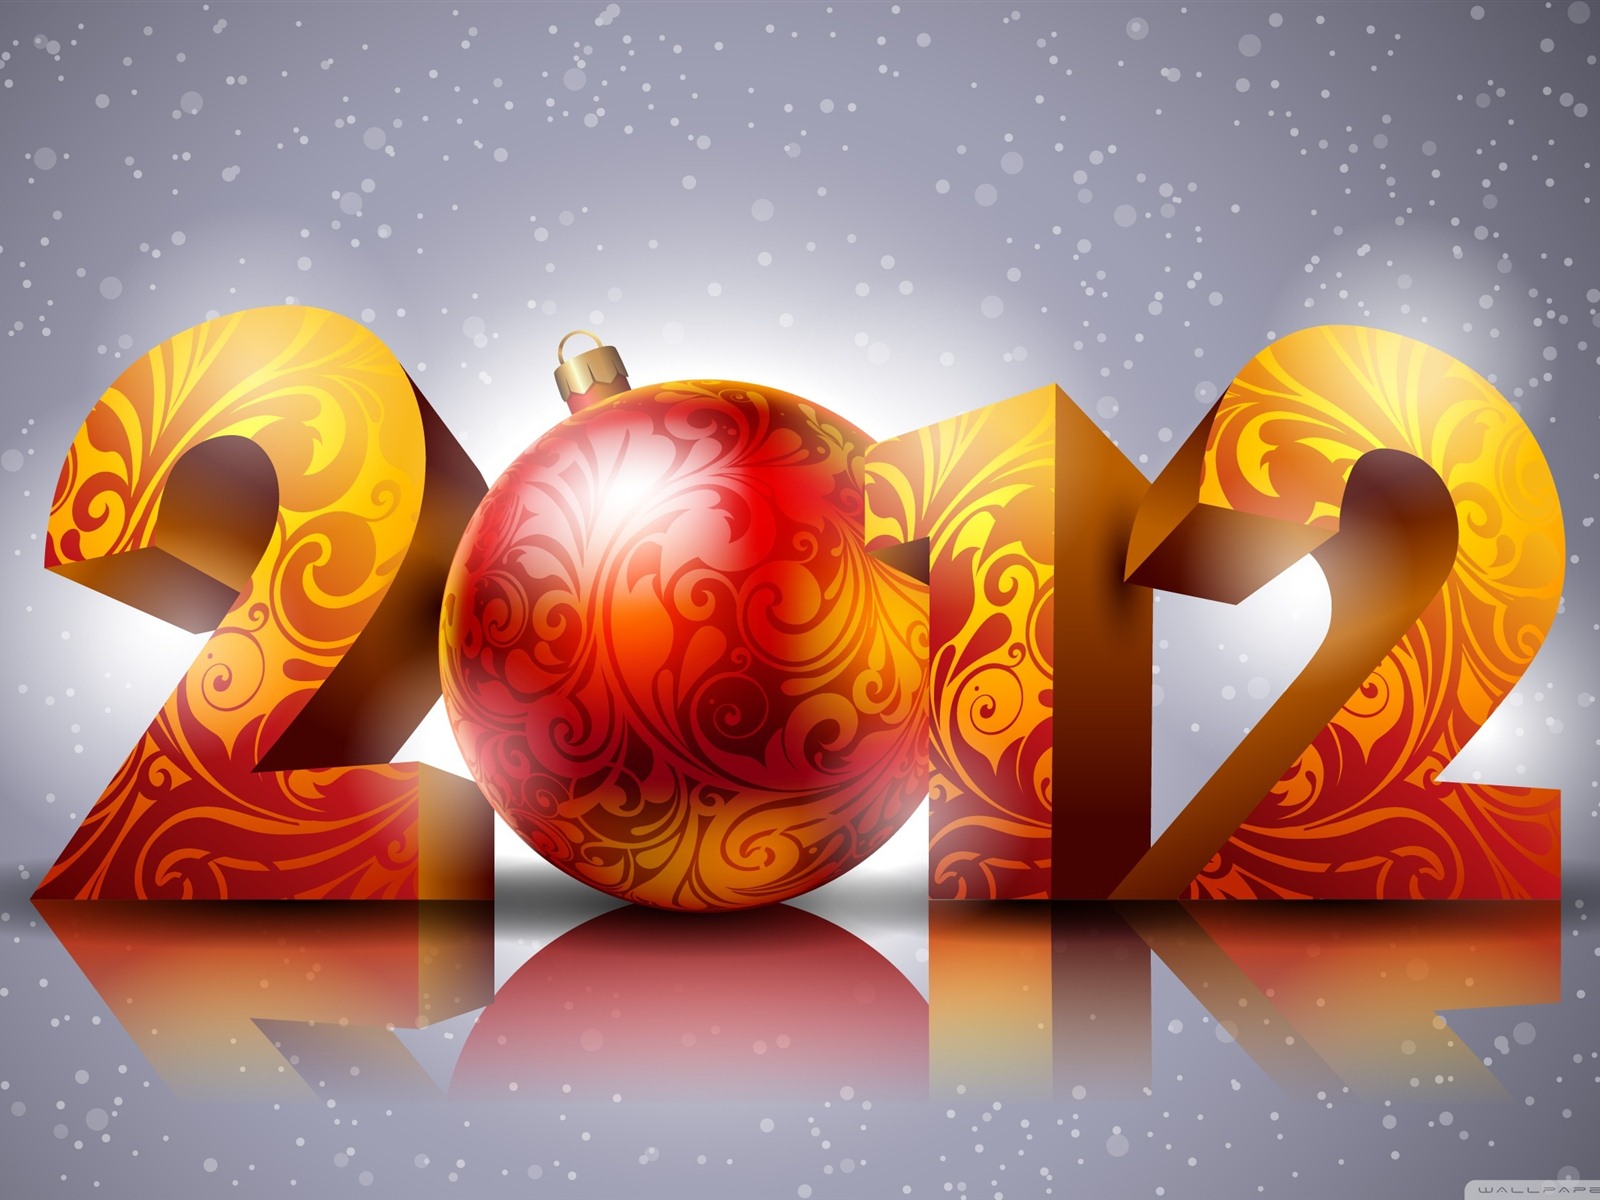 2012 New Year wallpapers (1) #10 - 1600x1200